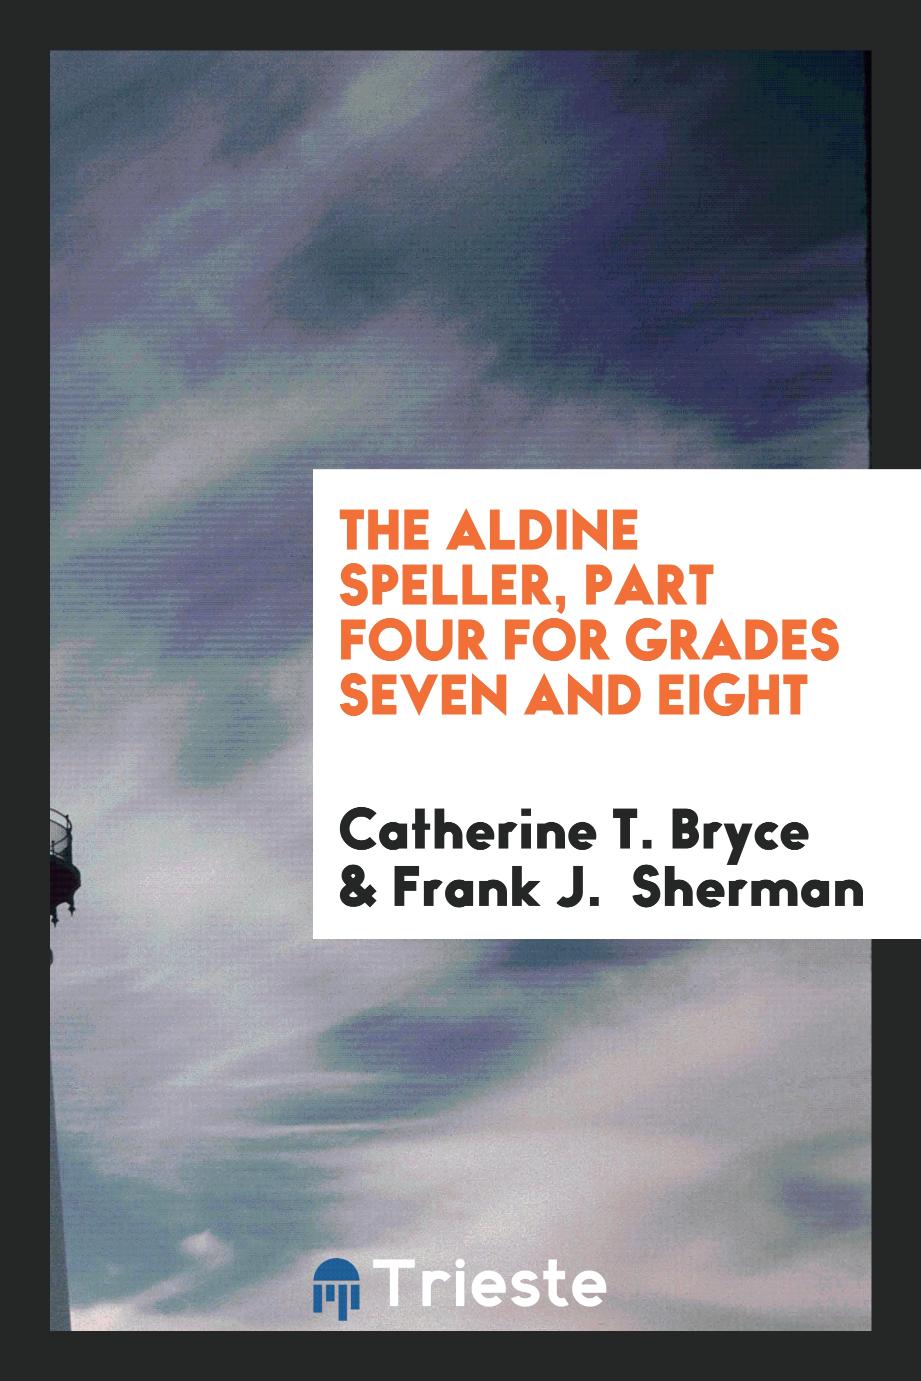 The Aldine Speller, Part Four for Grades Seven and Eight